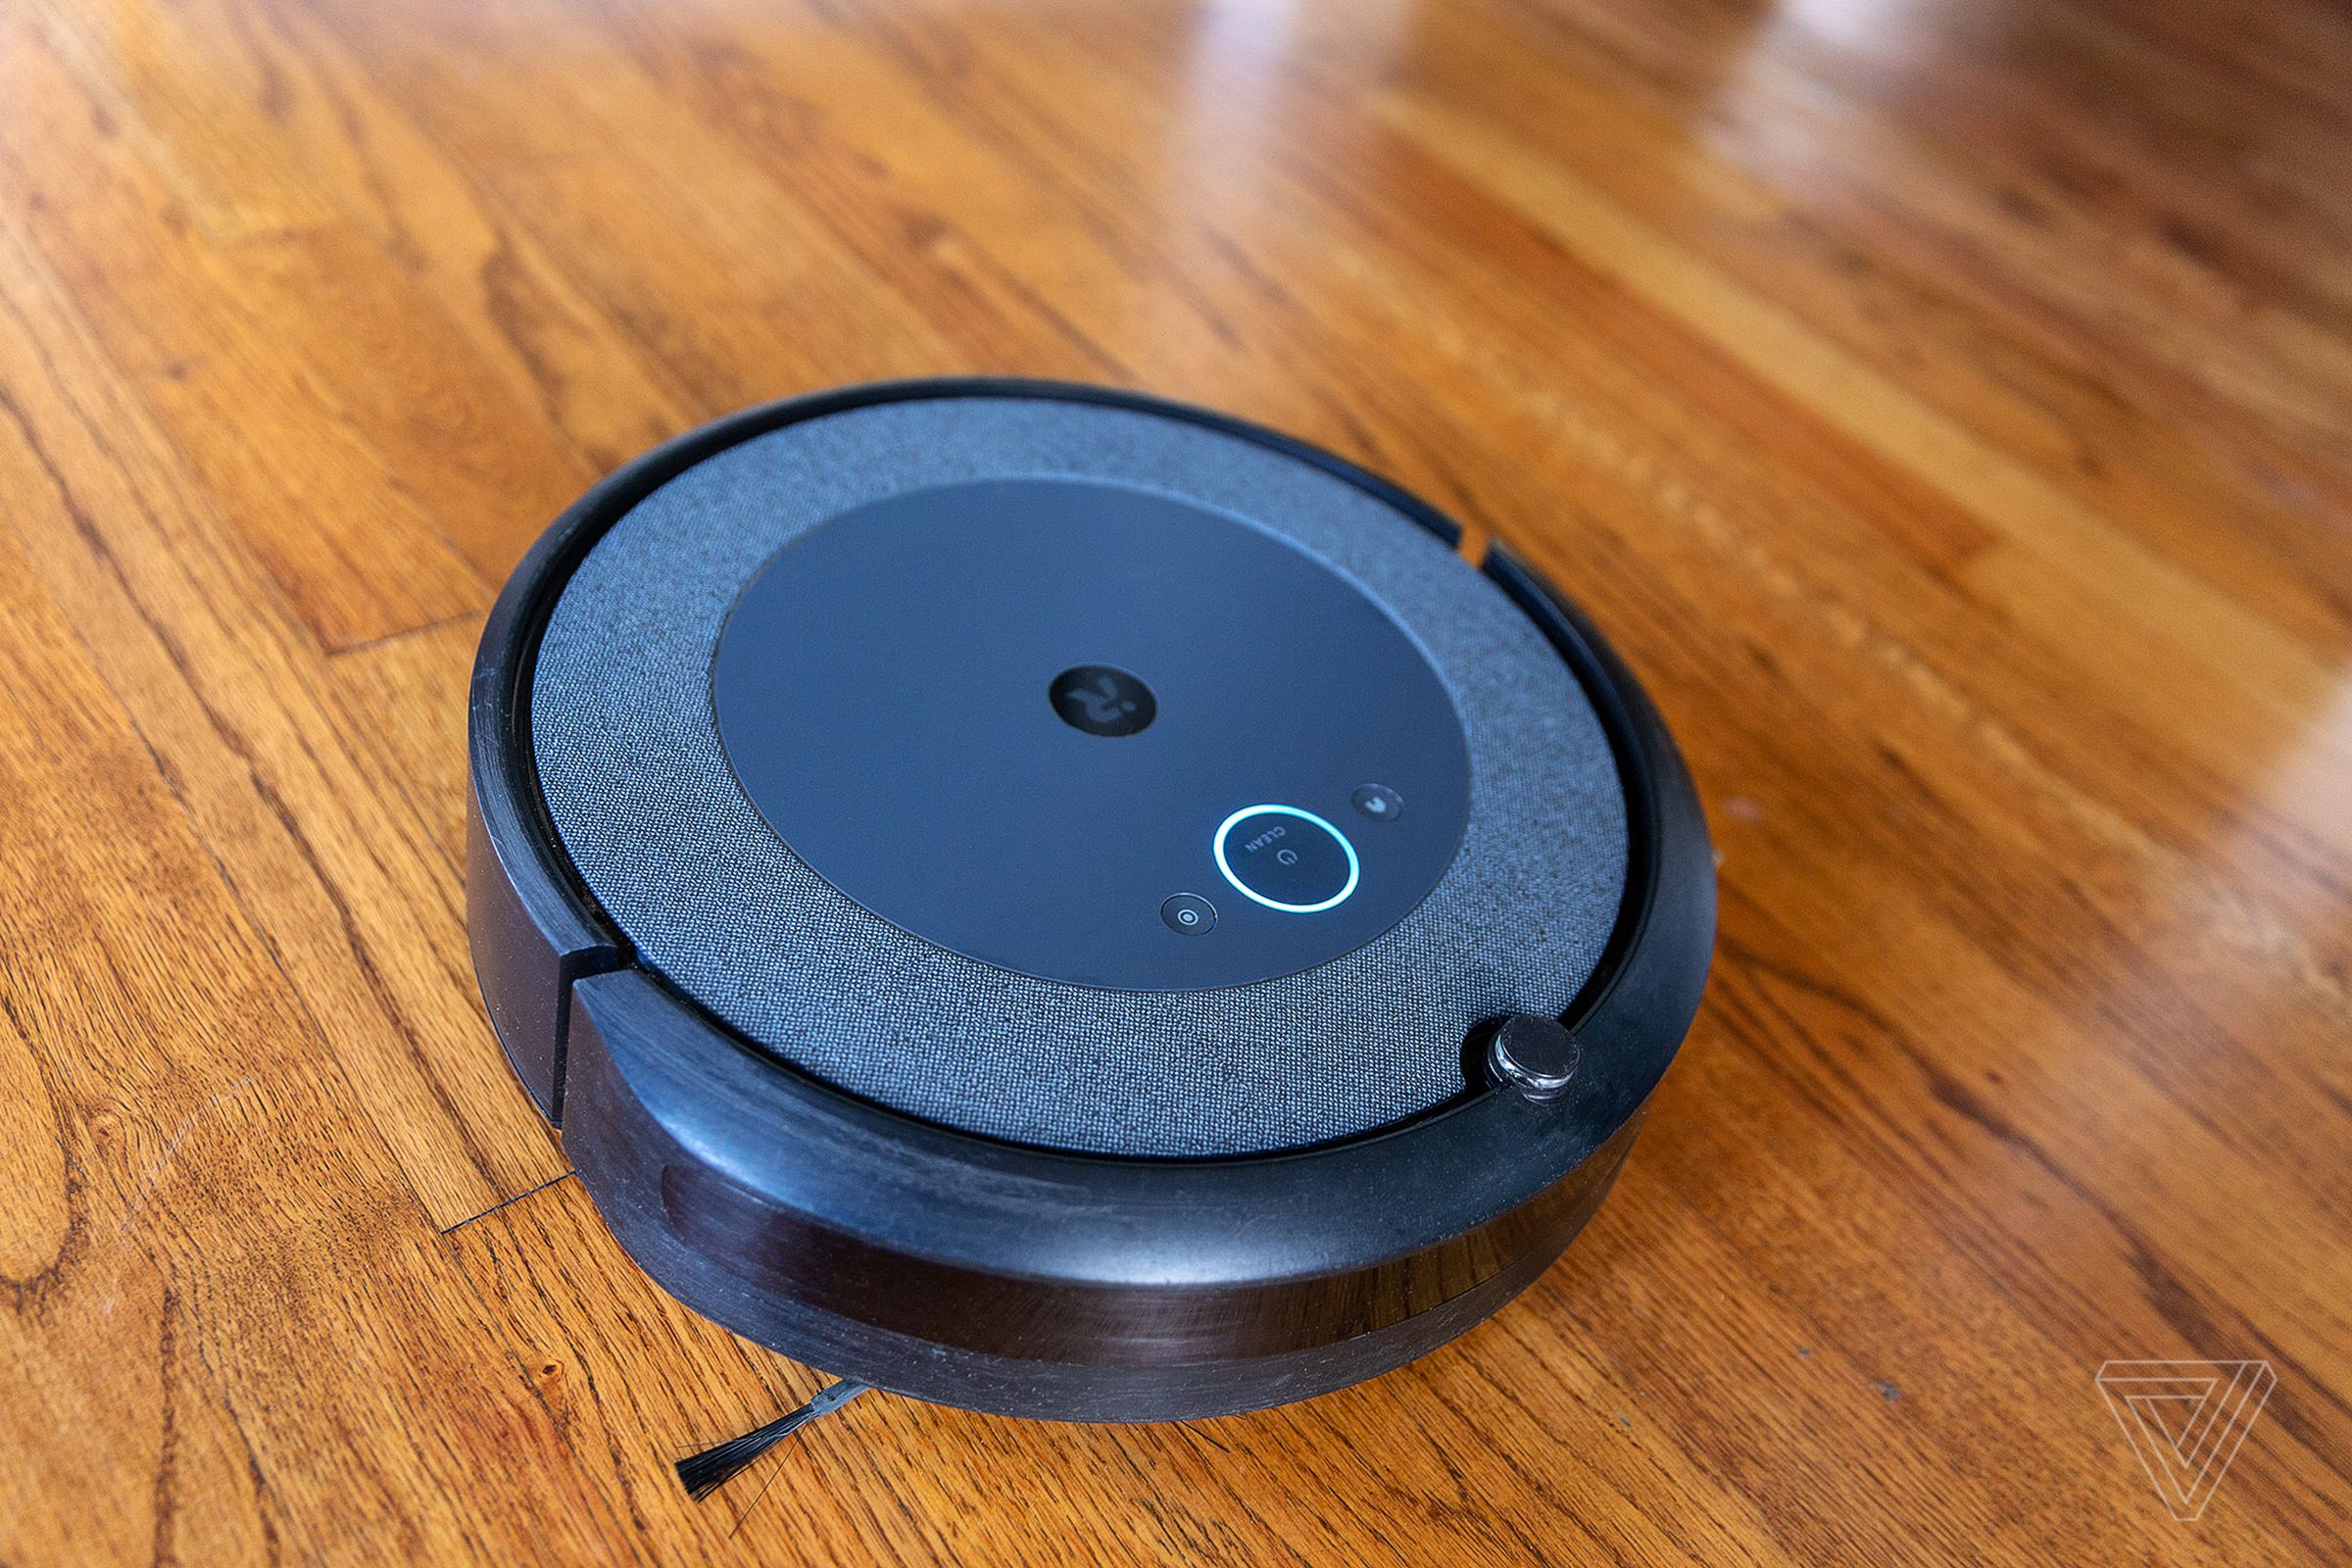 Just like the j7, the Roomba i3 uses two rubber brushes and a side brush. Unlike the j7, it has a spot-cleaning button on the robot.